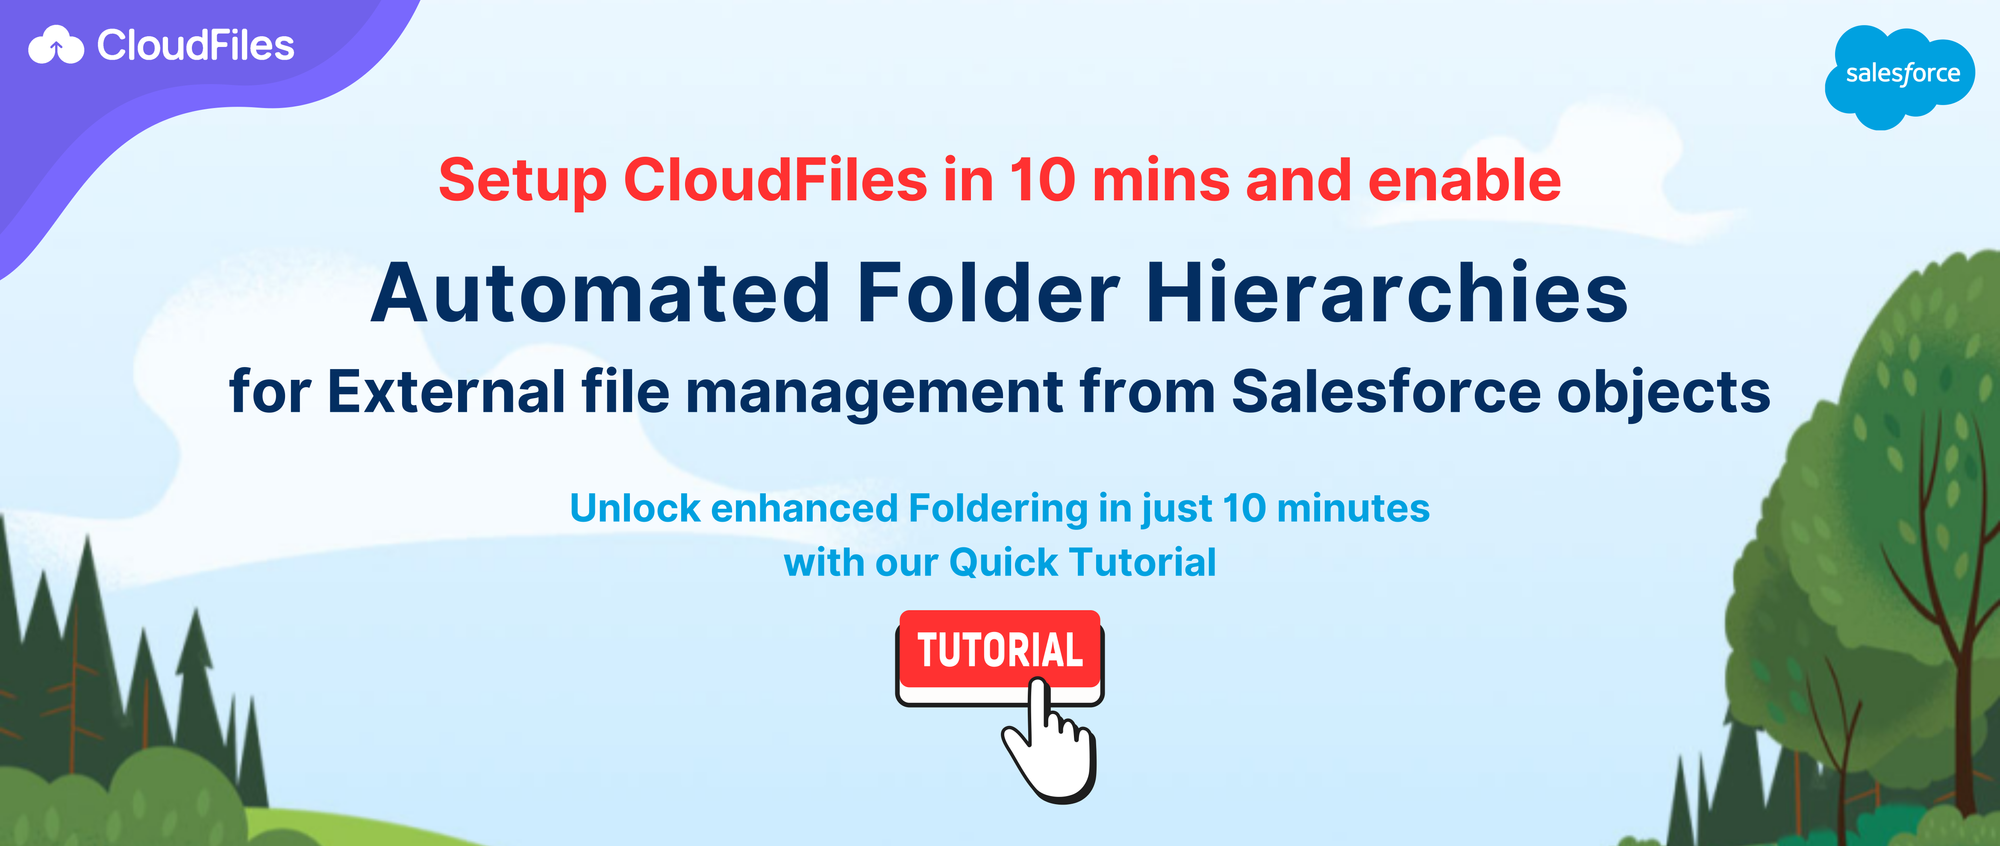 Automatic Folder Hierarchies for External File Management from Salesforce Objects